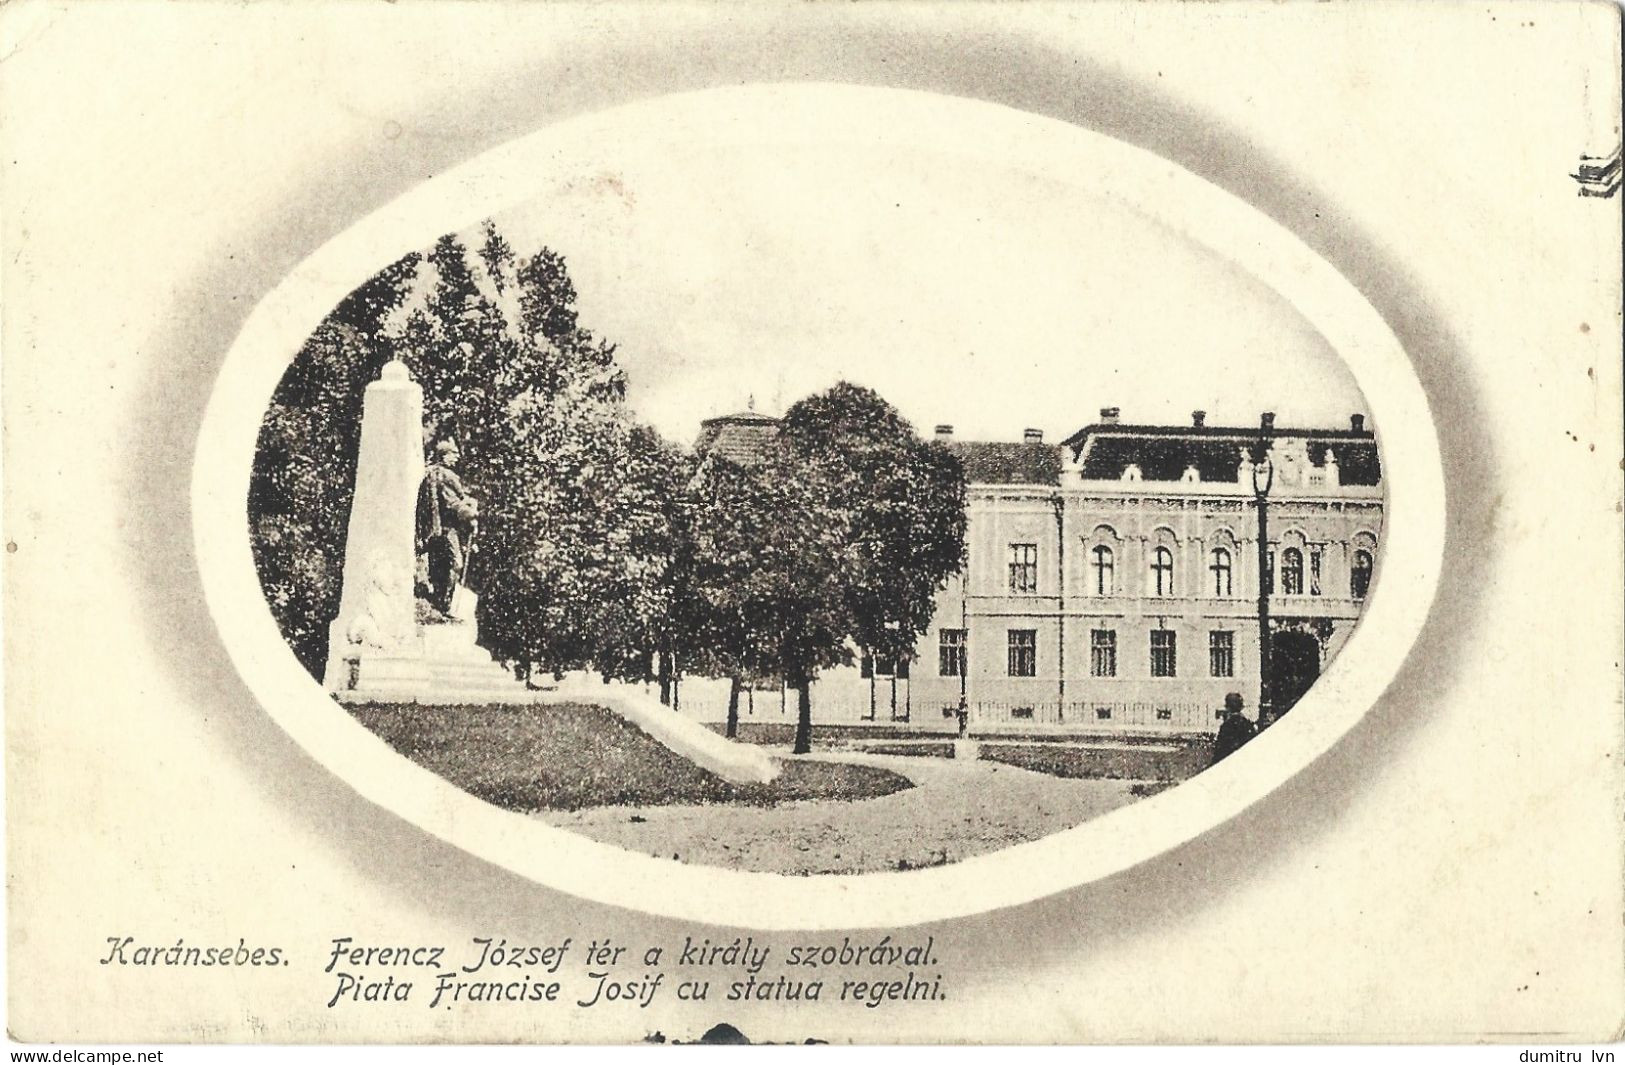 ROMANIA 1916 CARANSEBES - FRANCISE JOSEPH SQUARE WITH THE KING'S STATUE, BUILDING, ARCHITECTURE, PARK - Roumanie